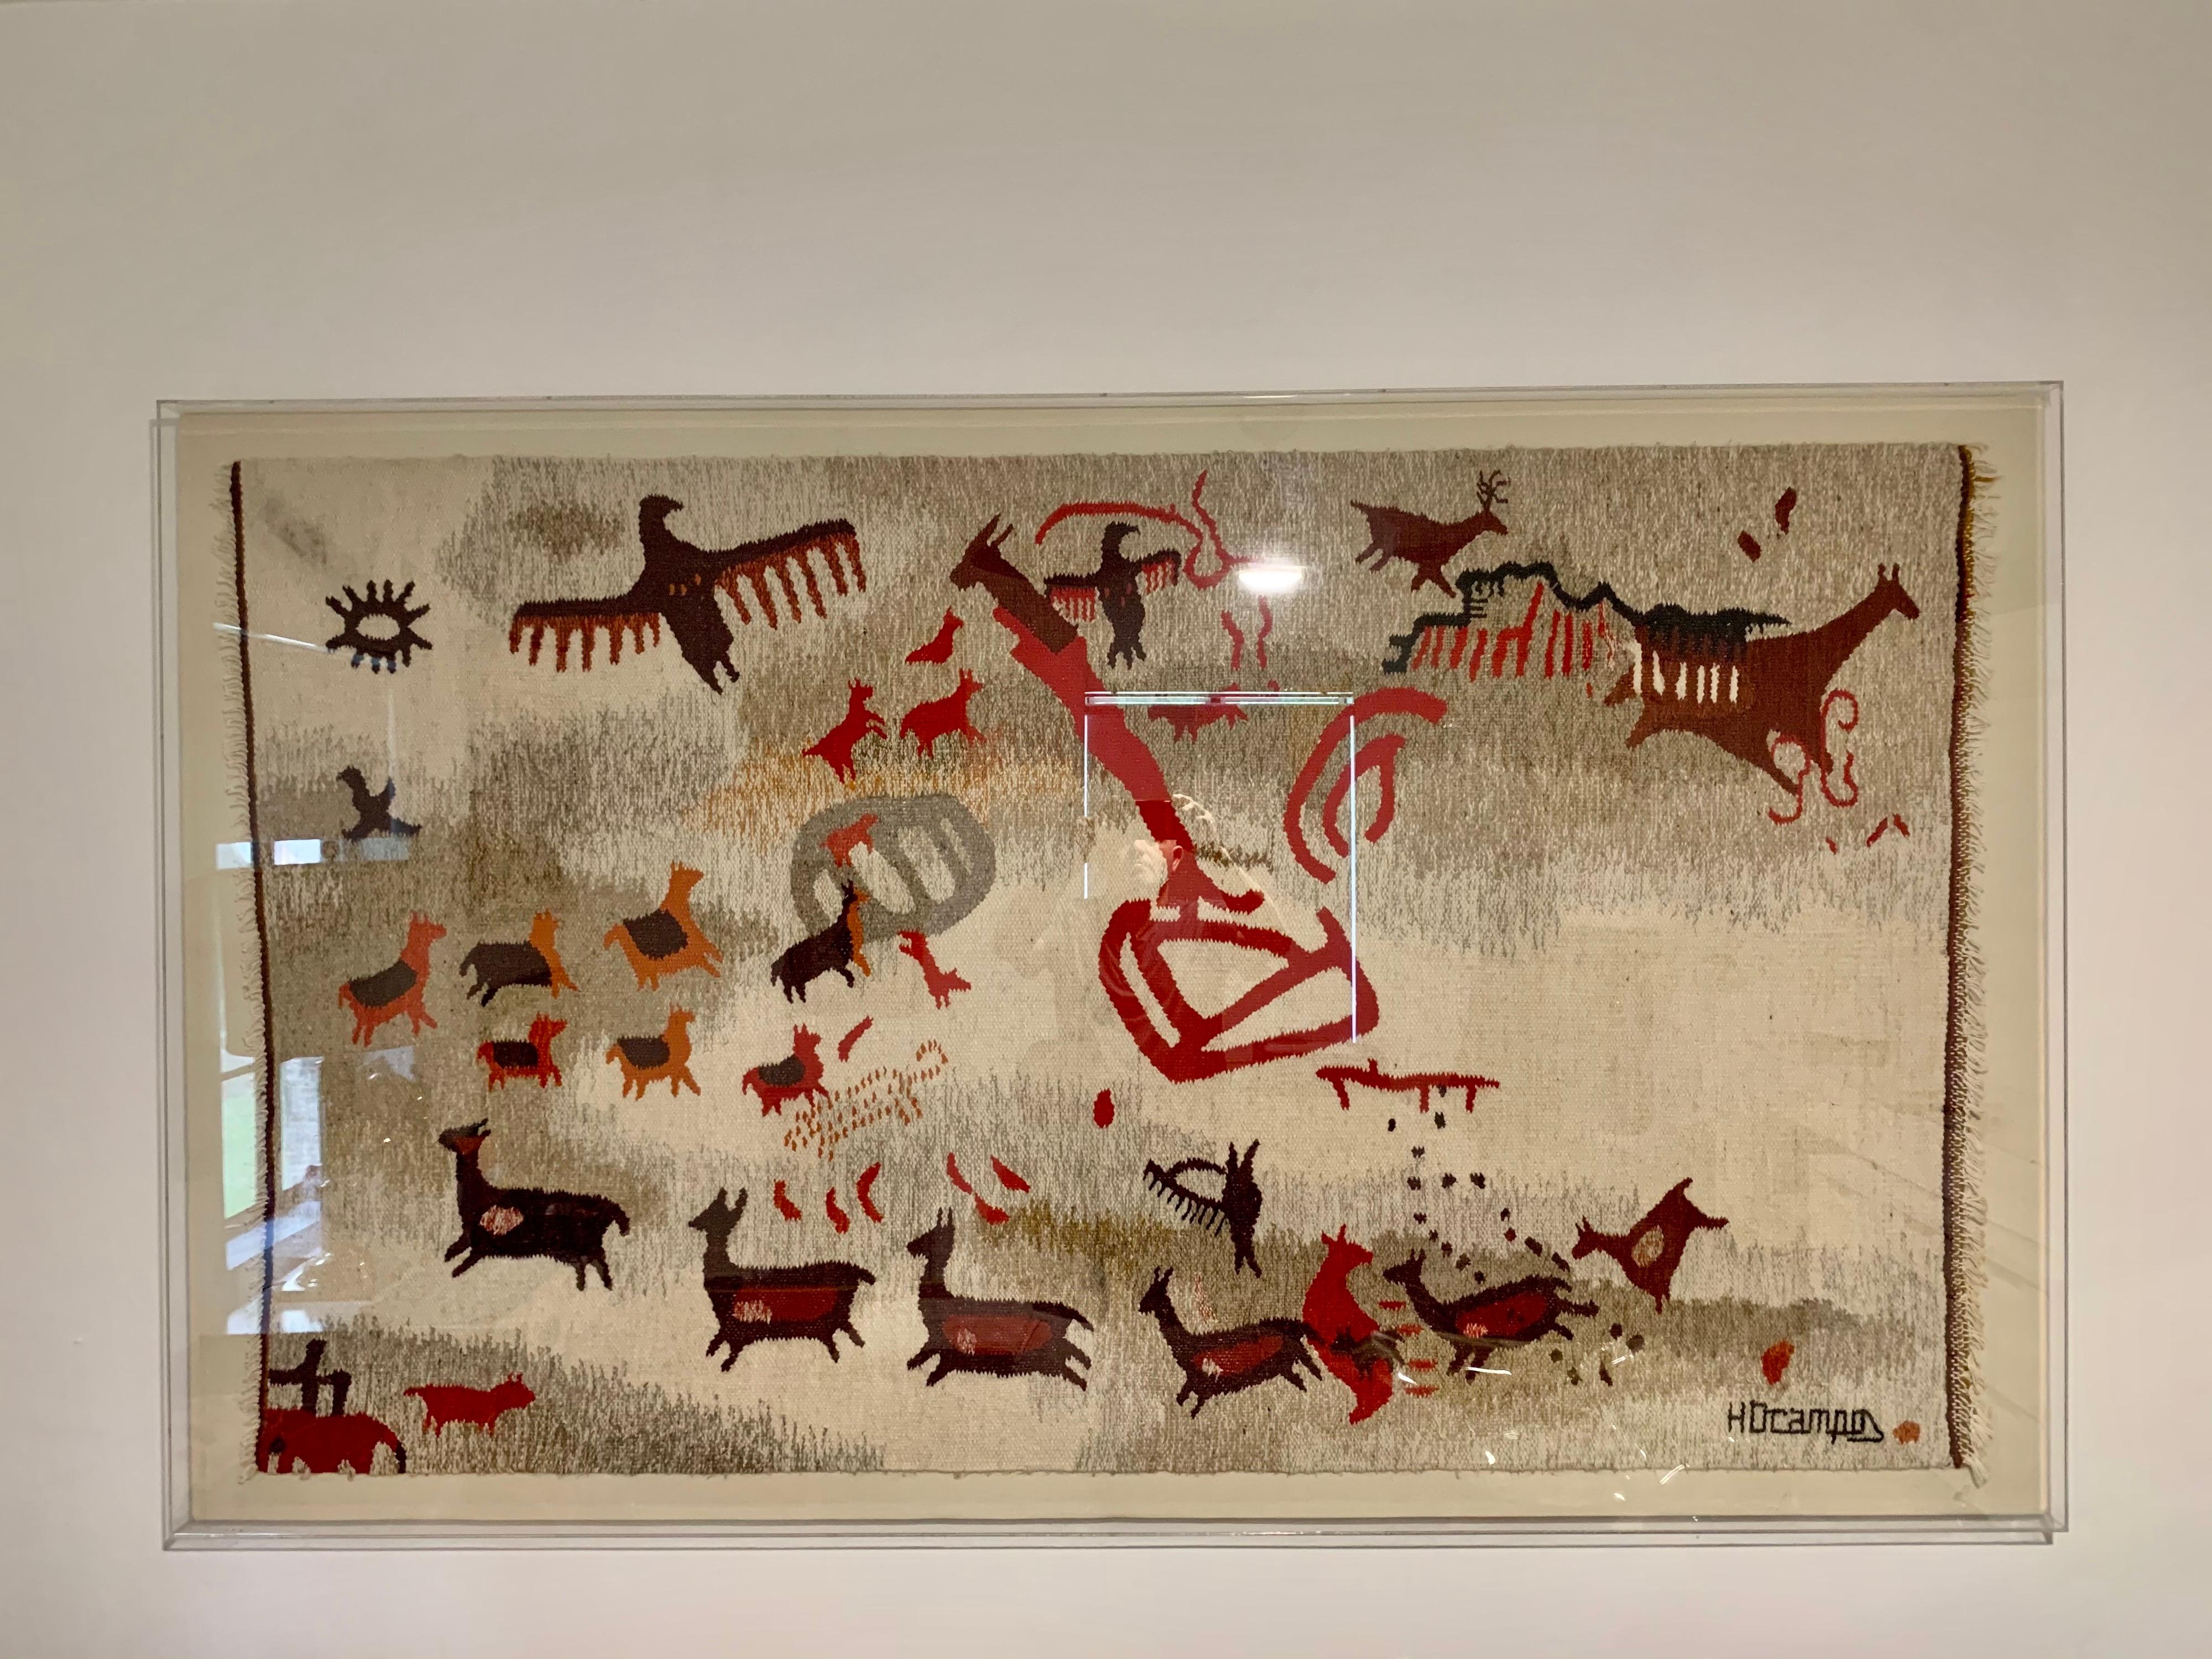 This shadow box all acrylic framed handwoven wool rug with rich and vibrant colors. This is a Signed piece by H. Ocampos, renowned for his technique and mastery of indigenous scenes from Argentina's North country.